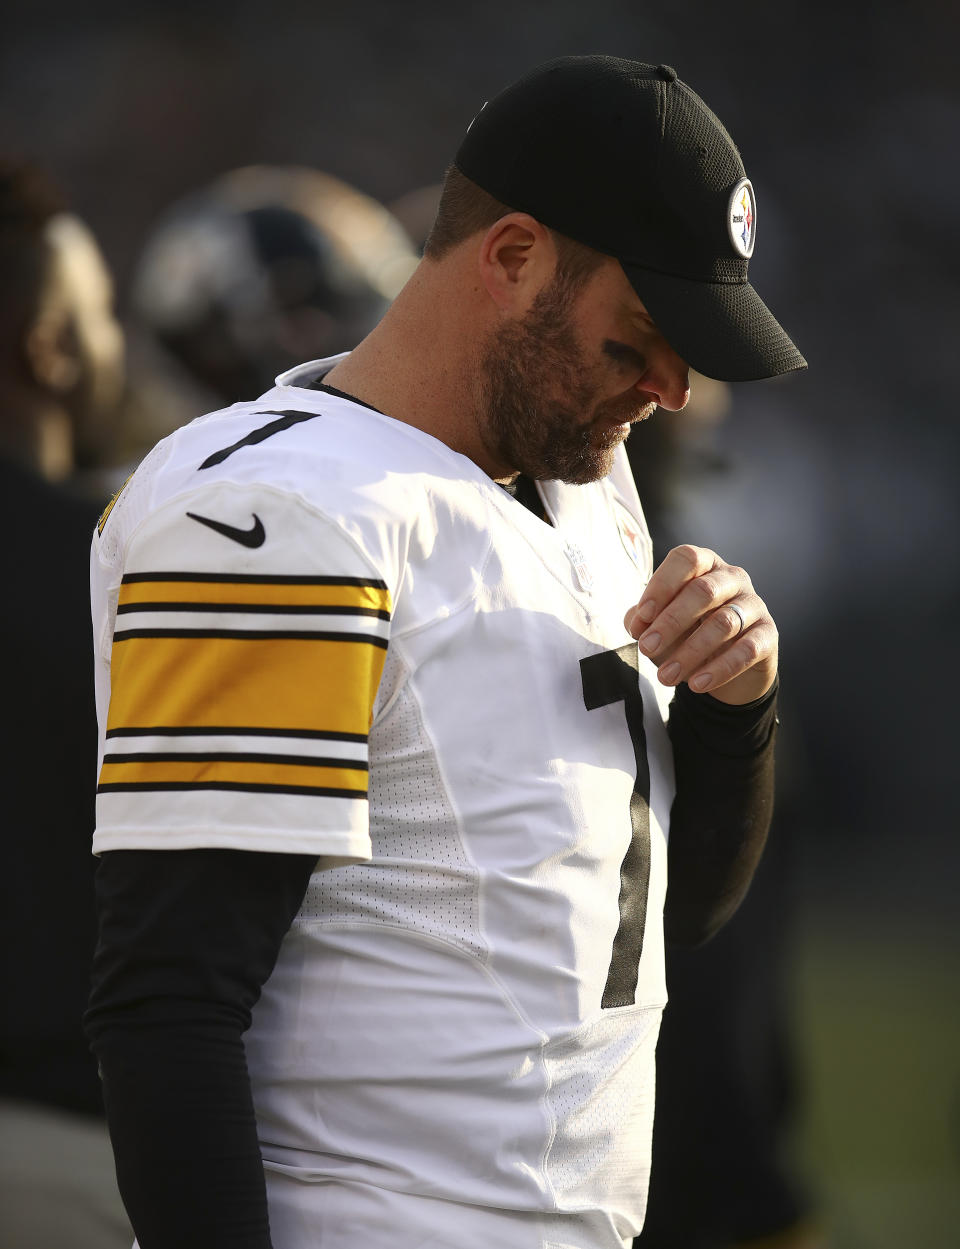 Pittsburgh Steelers quarterback Ben Roethlisberger (7) stands on the sideline during the second half of an NFL football game against the Oakland Raiders in Oakland, Calif., Sunday, Dec. 9, 2018. (AP Photo/Ben Margot)